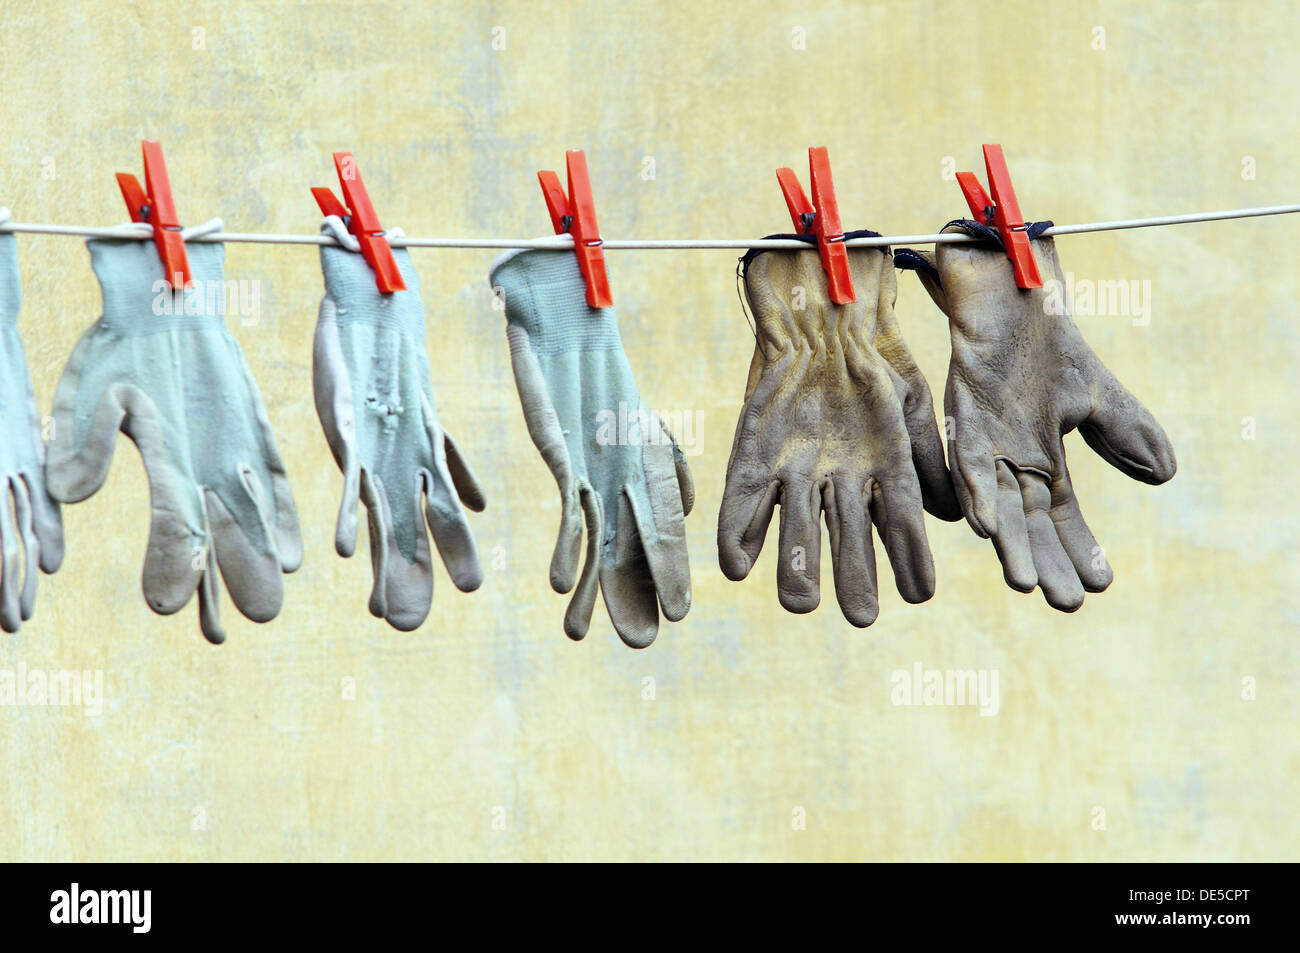 Work Gloves Hanging on a Line Stock Photo